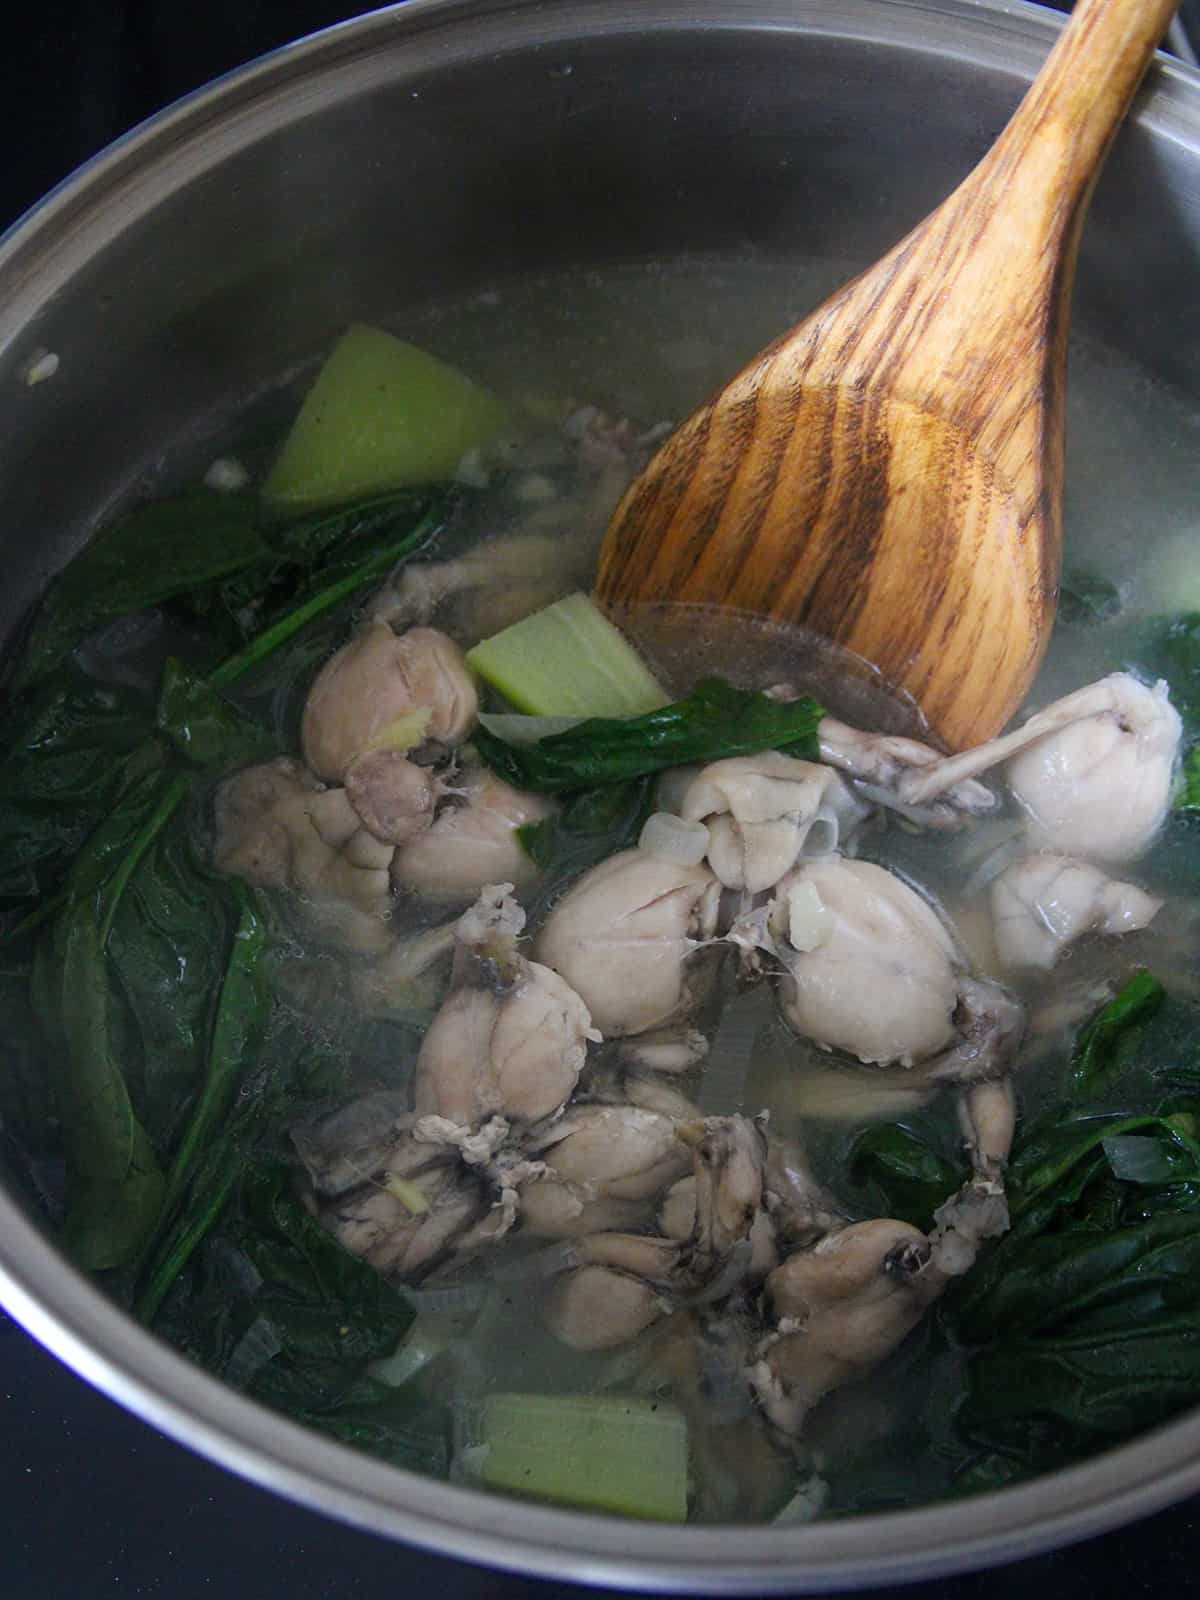 serving Tinolang Palaka from a pot with a wooden spoon.